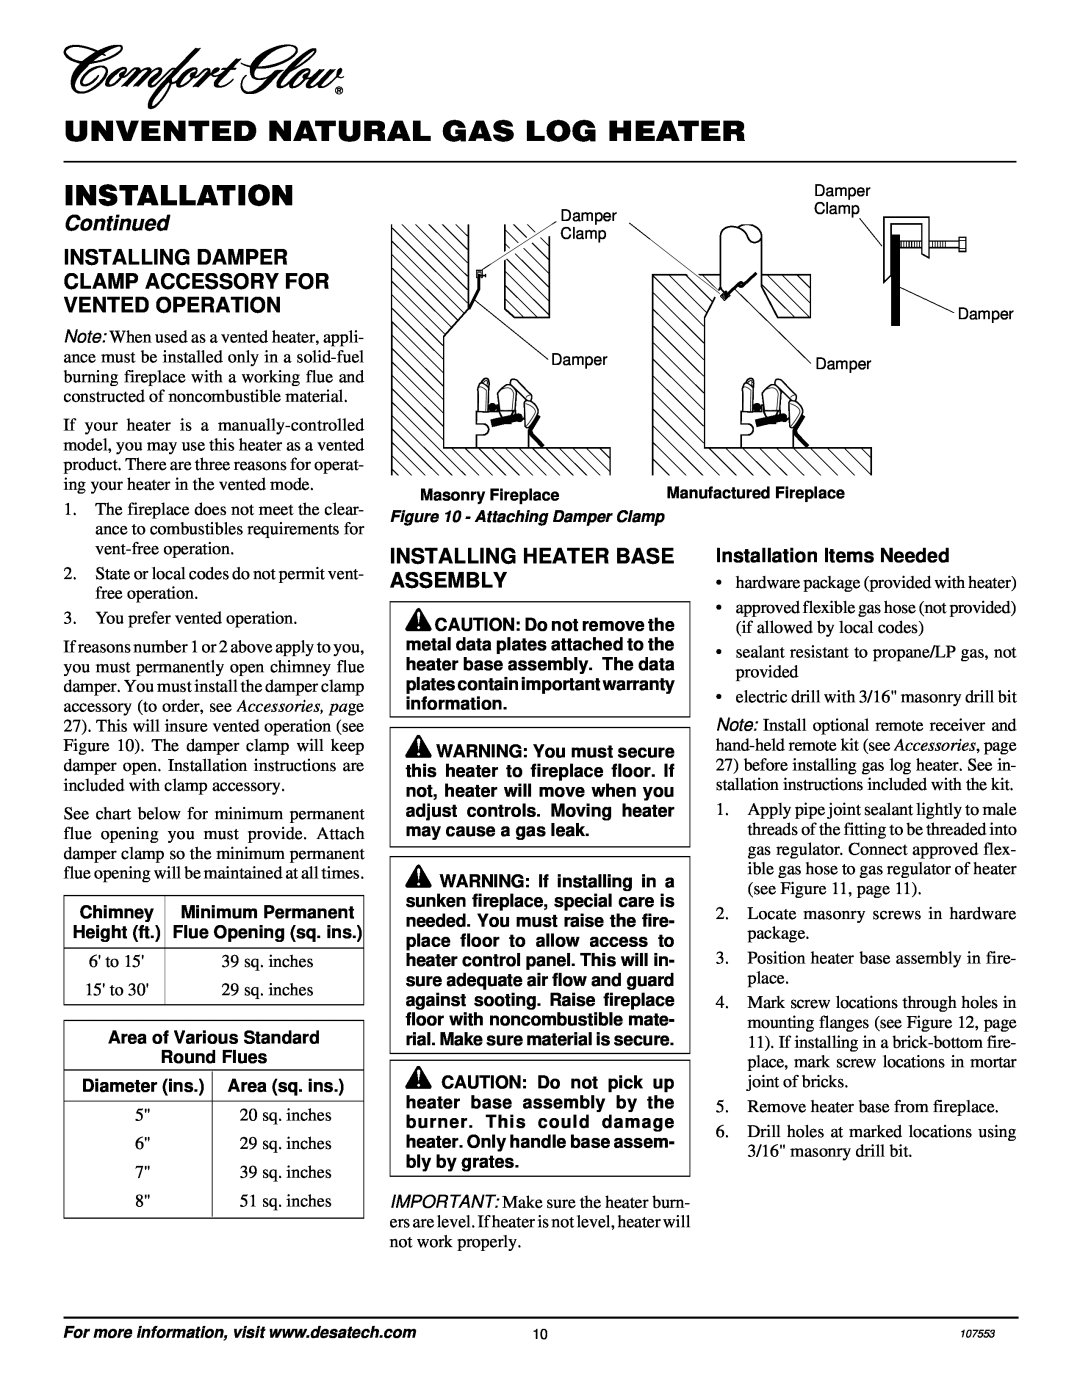 Desa CCL3930NR, CCL3924NR Installing Heater Base Assembly, Unvented Natural Gas Log Heater, Installation, Continued 